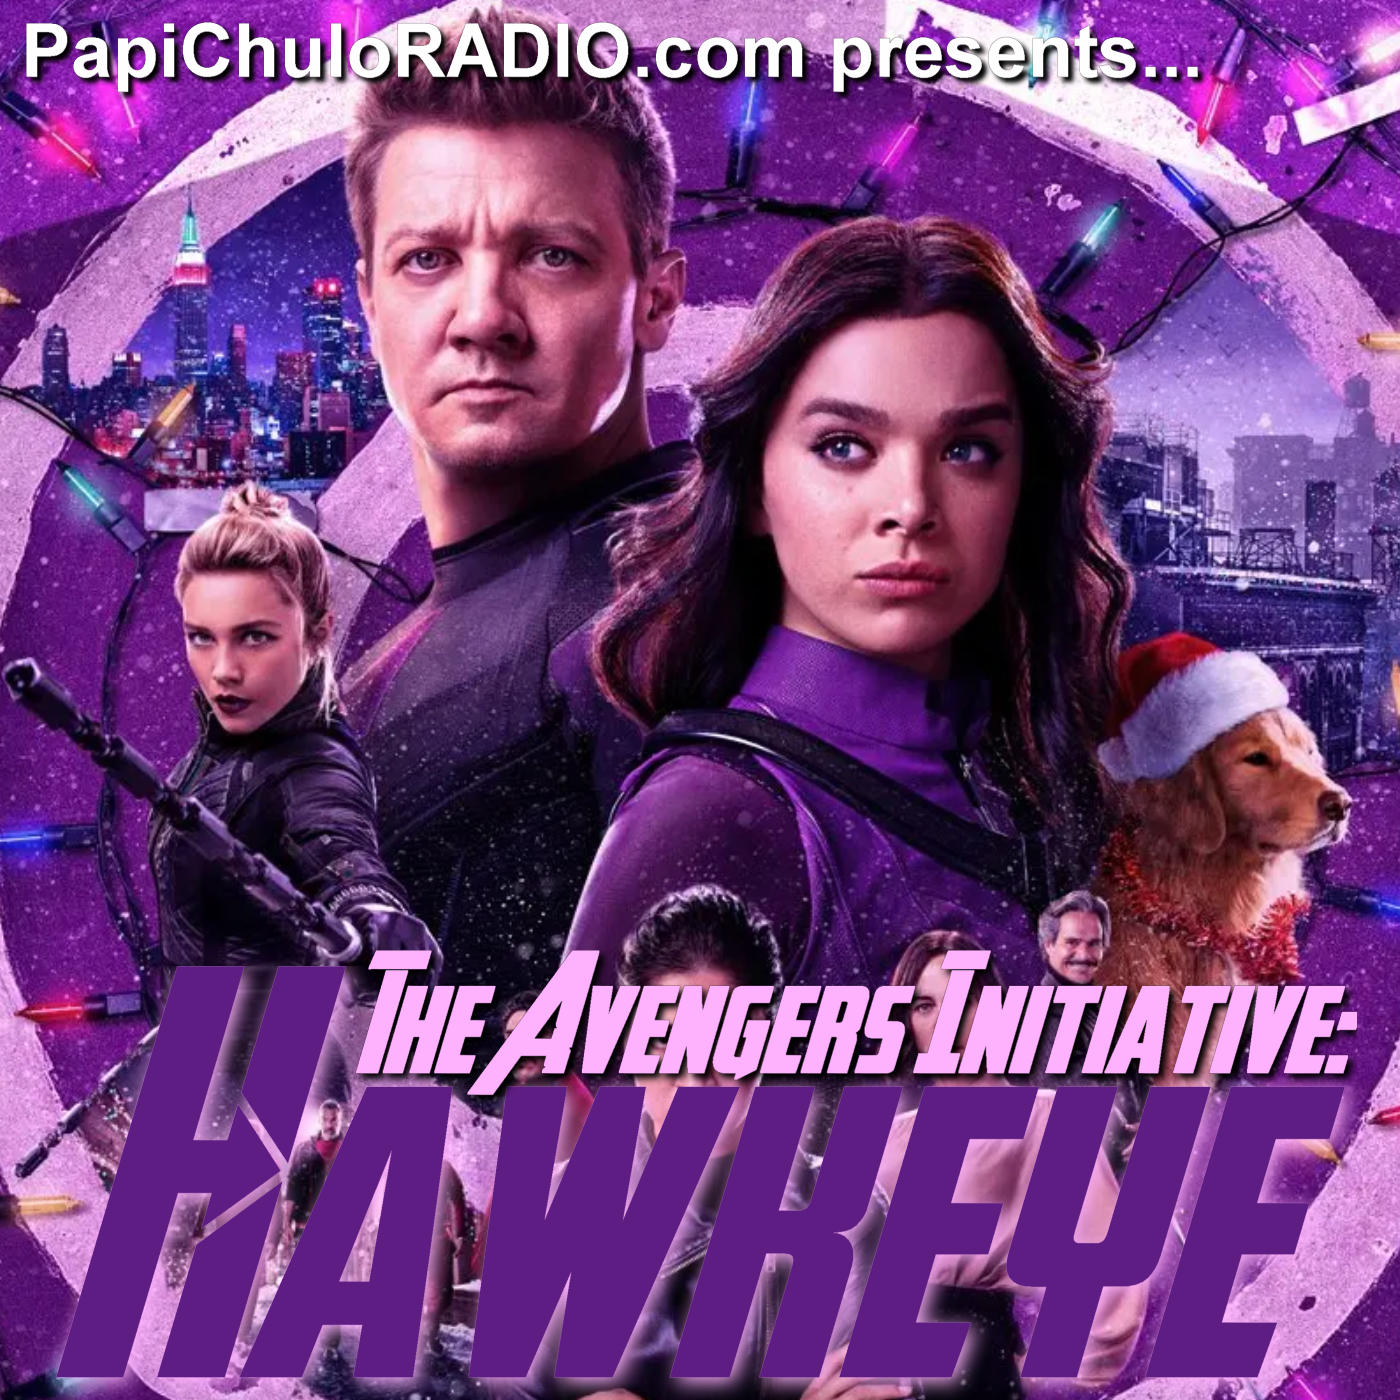 So This Is Christmas? – The Avengers Initiative: Hawkeye [December 28, 2021]